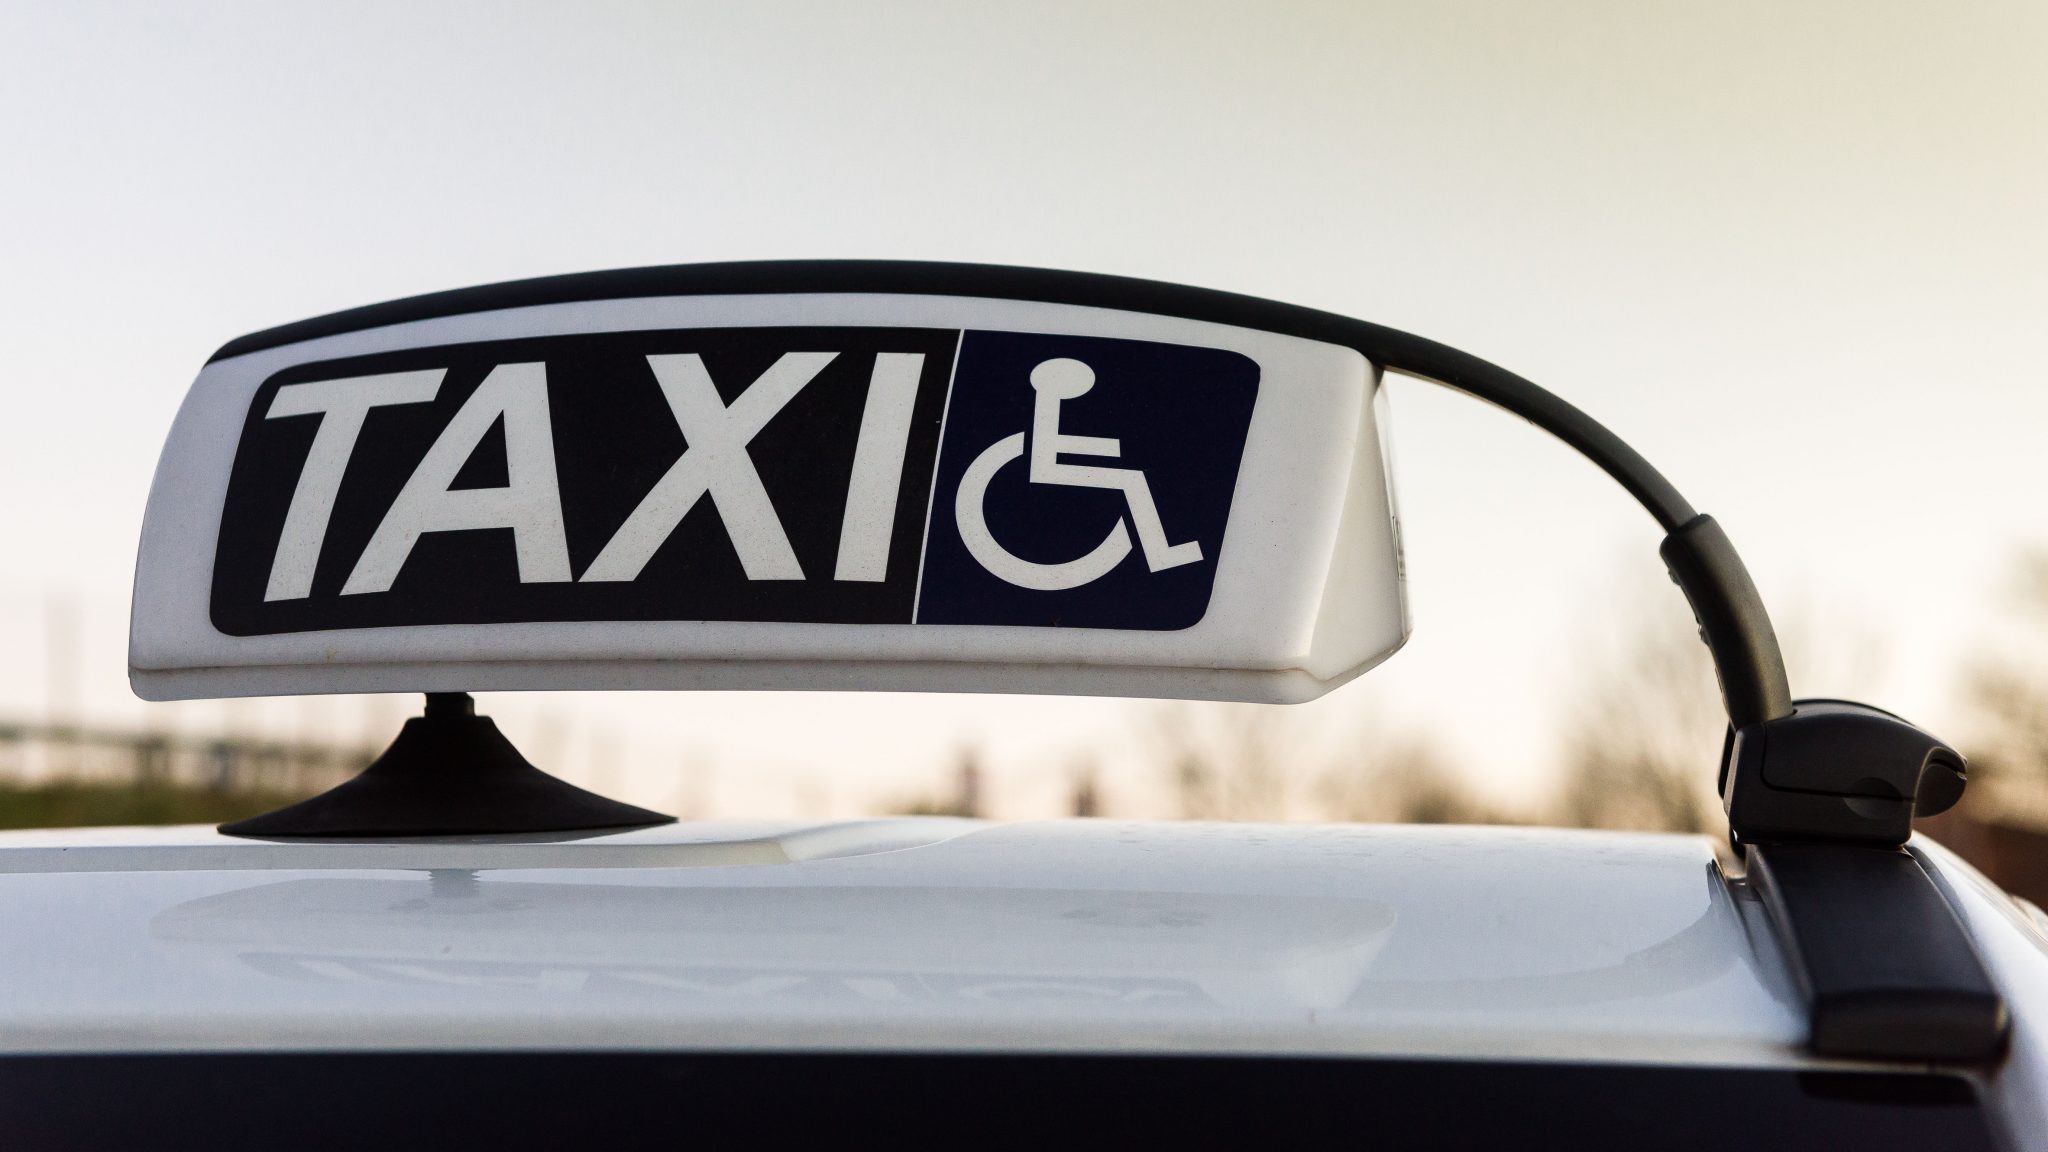 Taxi signage with wheelchair symbol